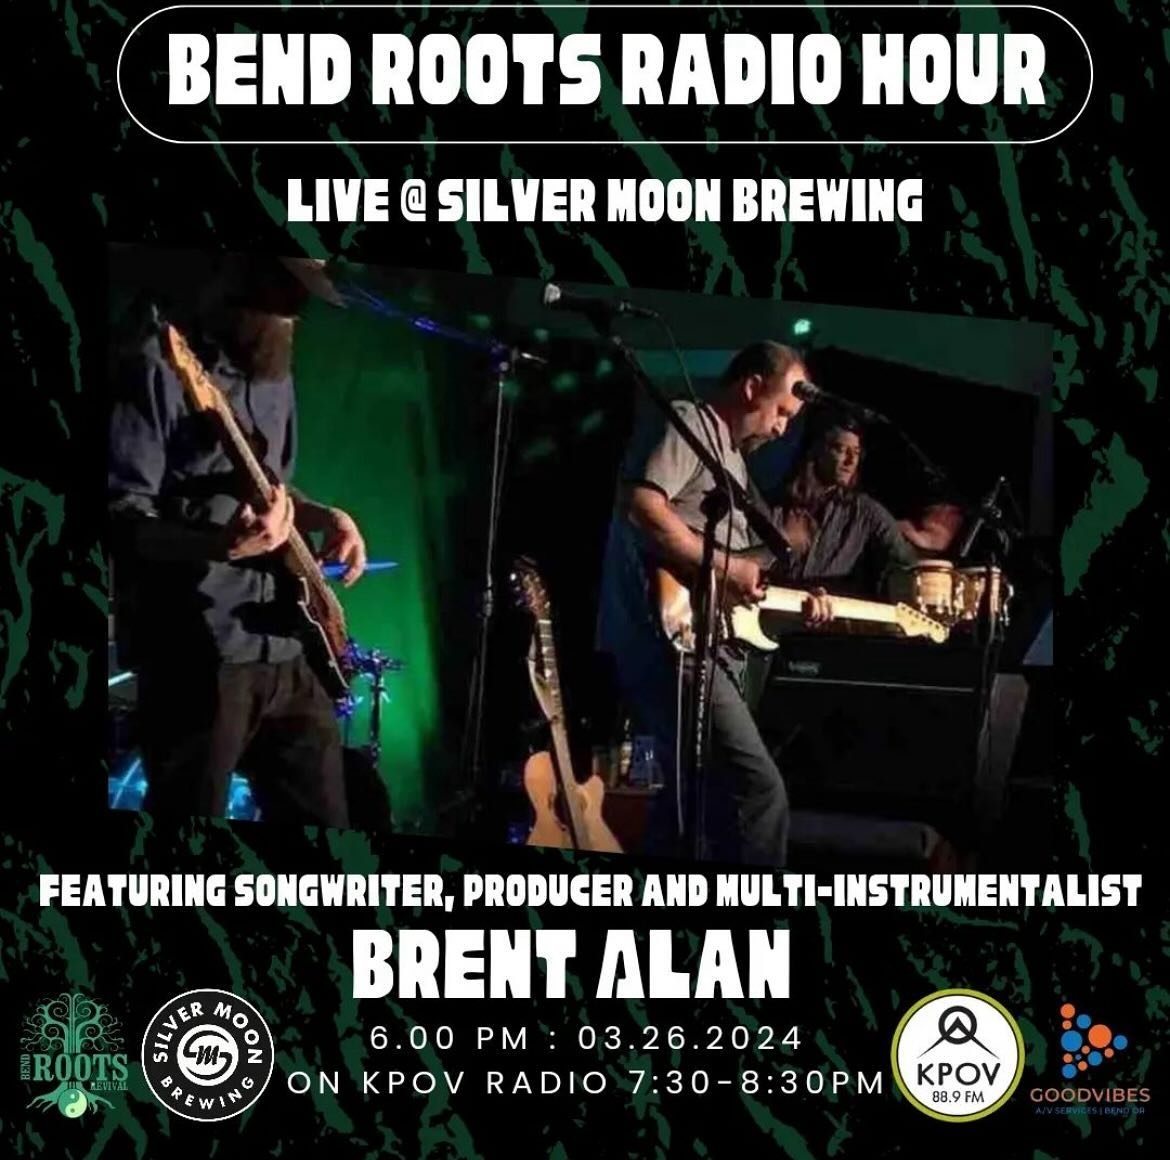 Tonight! Dont miss @bend_roots_revival Bend Roots Radio Hour featuring Brent Allen. The show starts at 6pm at @silvermoonbrewing and will be broadcasted on KPOV at 7:30! Shoutout @goodvibesstudios_bend for helping put on the event!